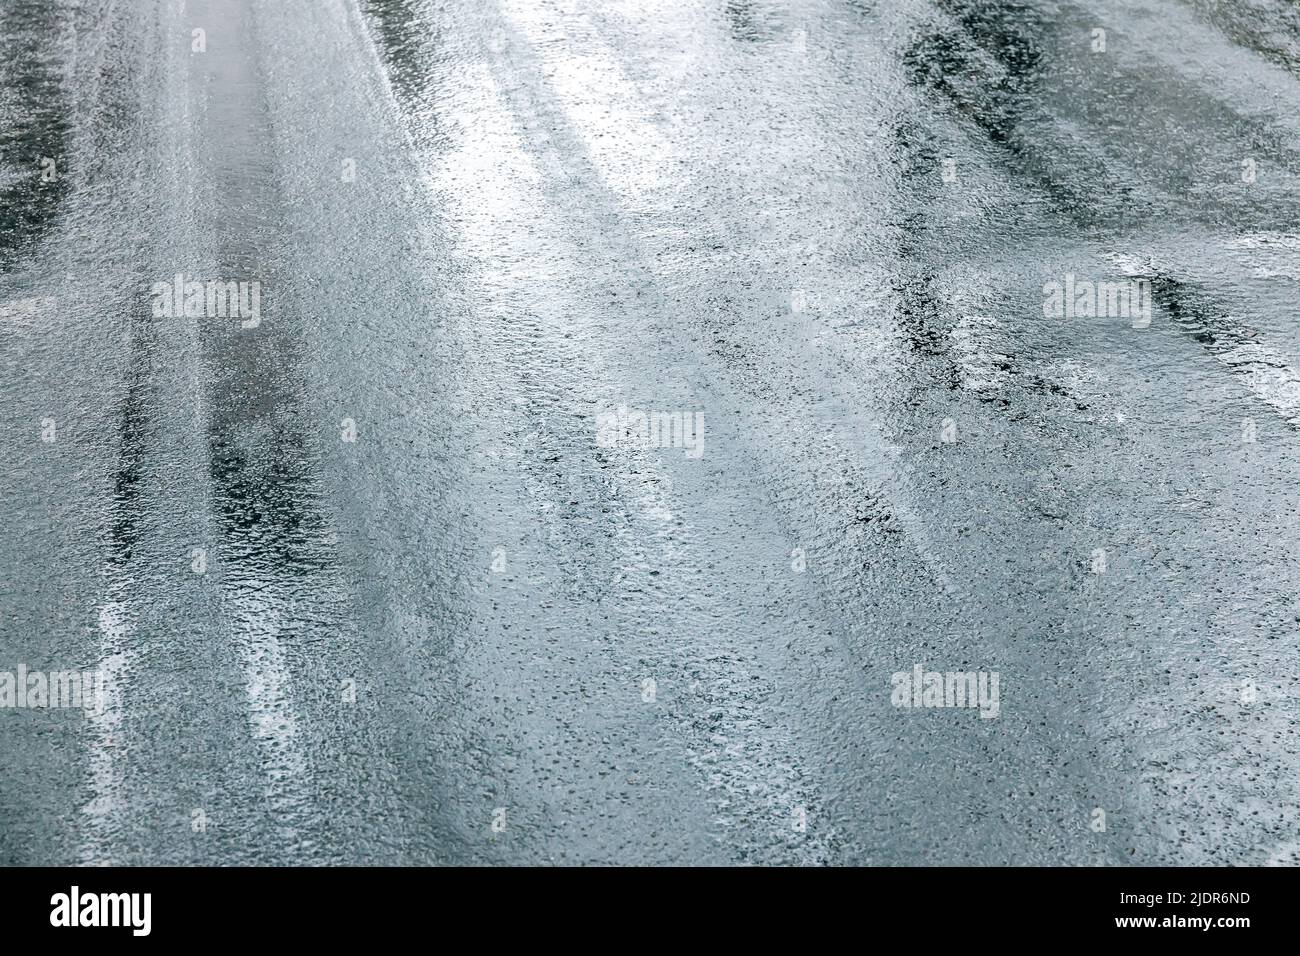 wet asphalt road surface with sky reflecting Stock Photo